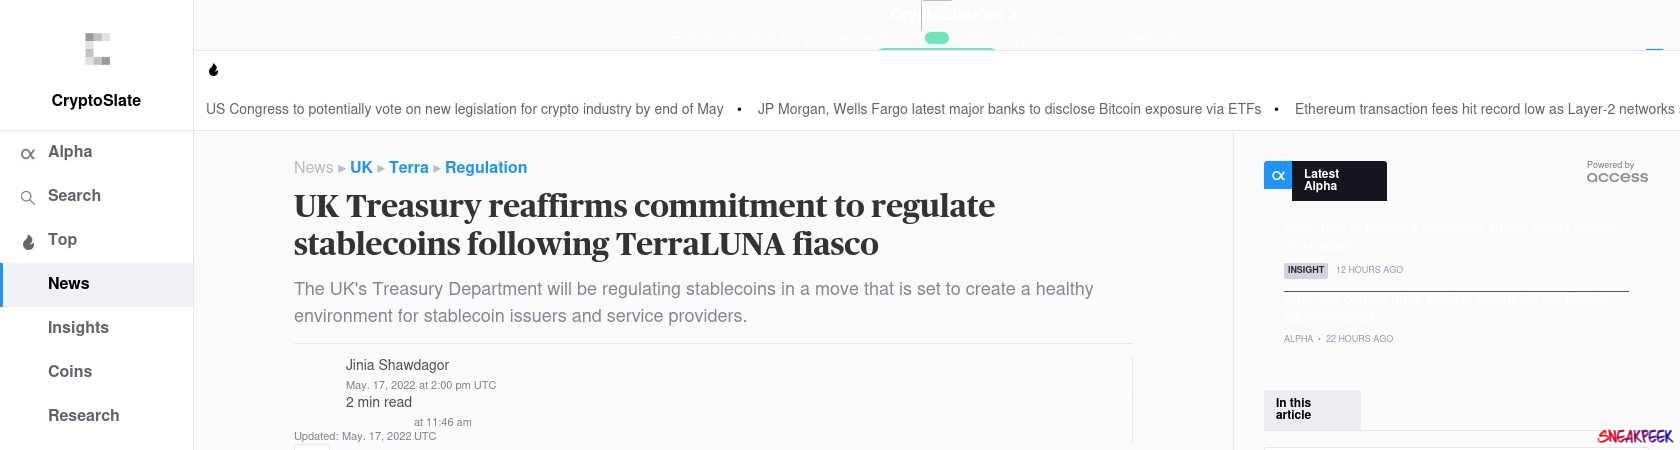 Read the full Article:  ⭲ UK Treasury reaffirms commitment to regulate stablecoins following TerraLUNA fiasco